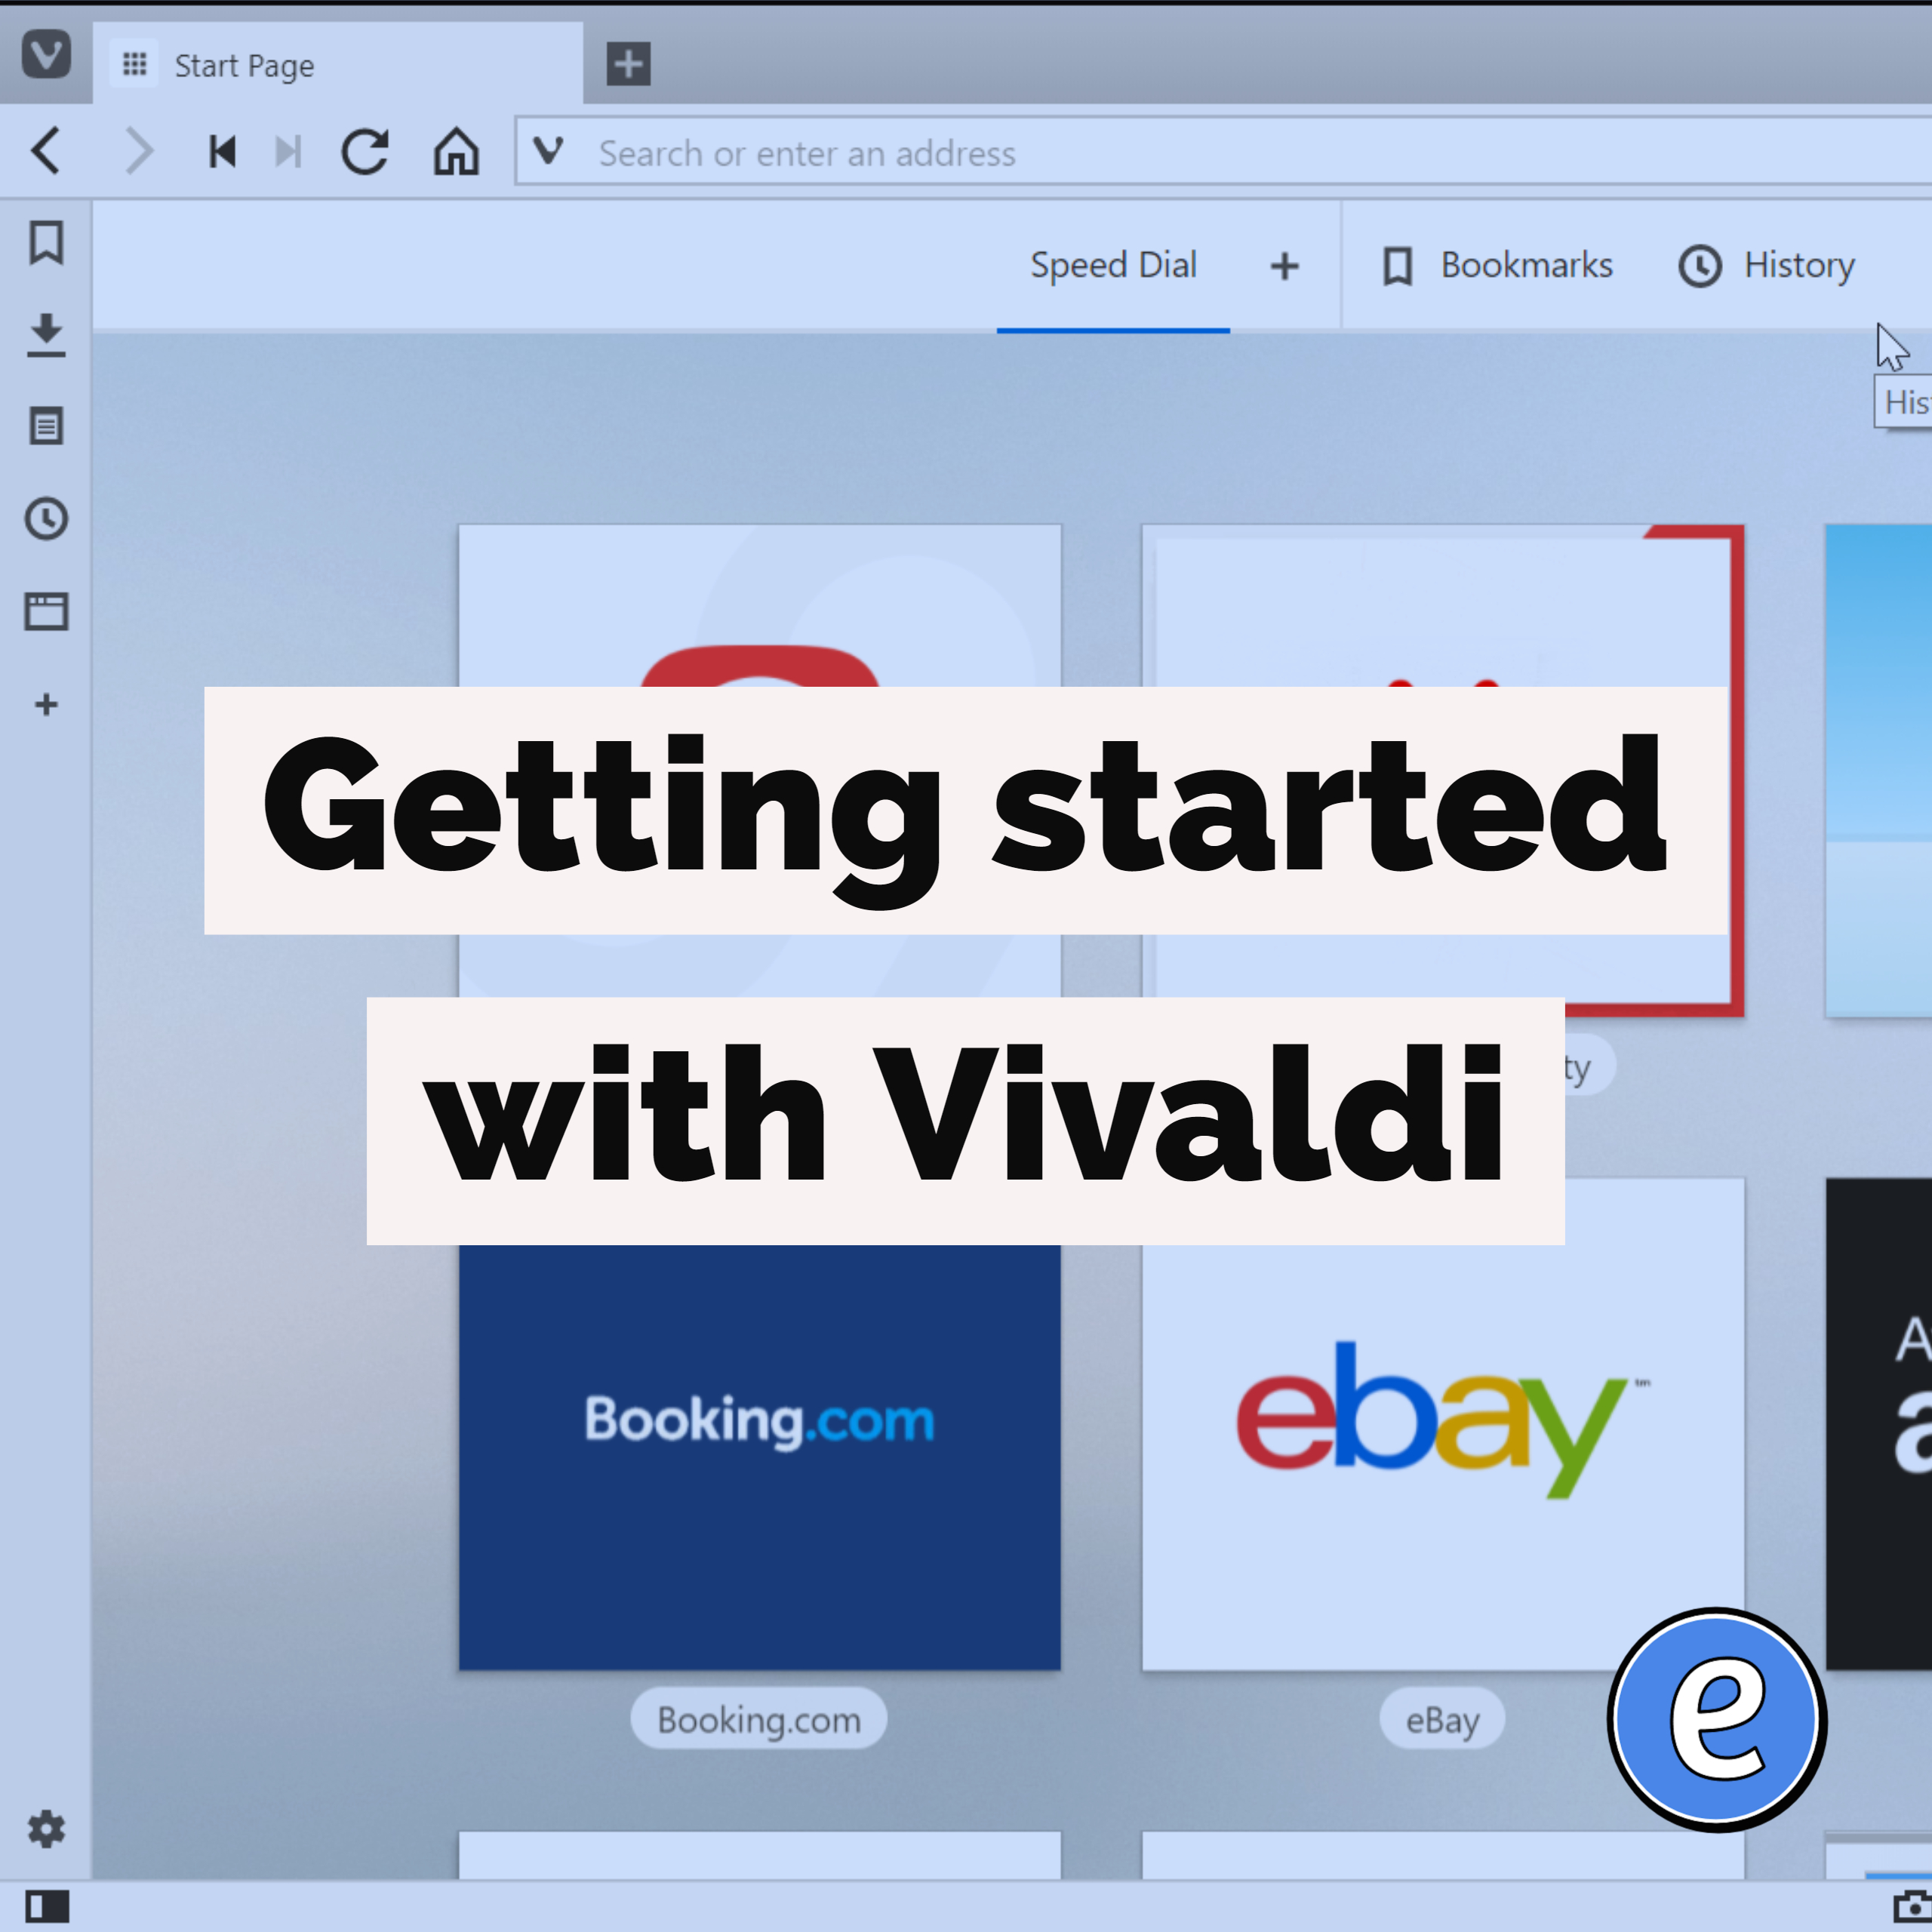 Getting started with Vivaldi